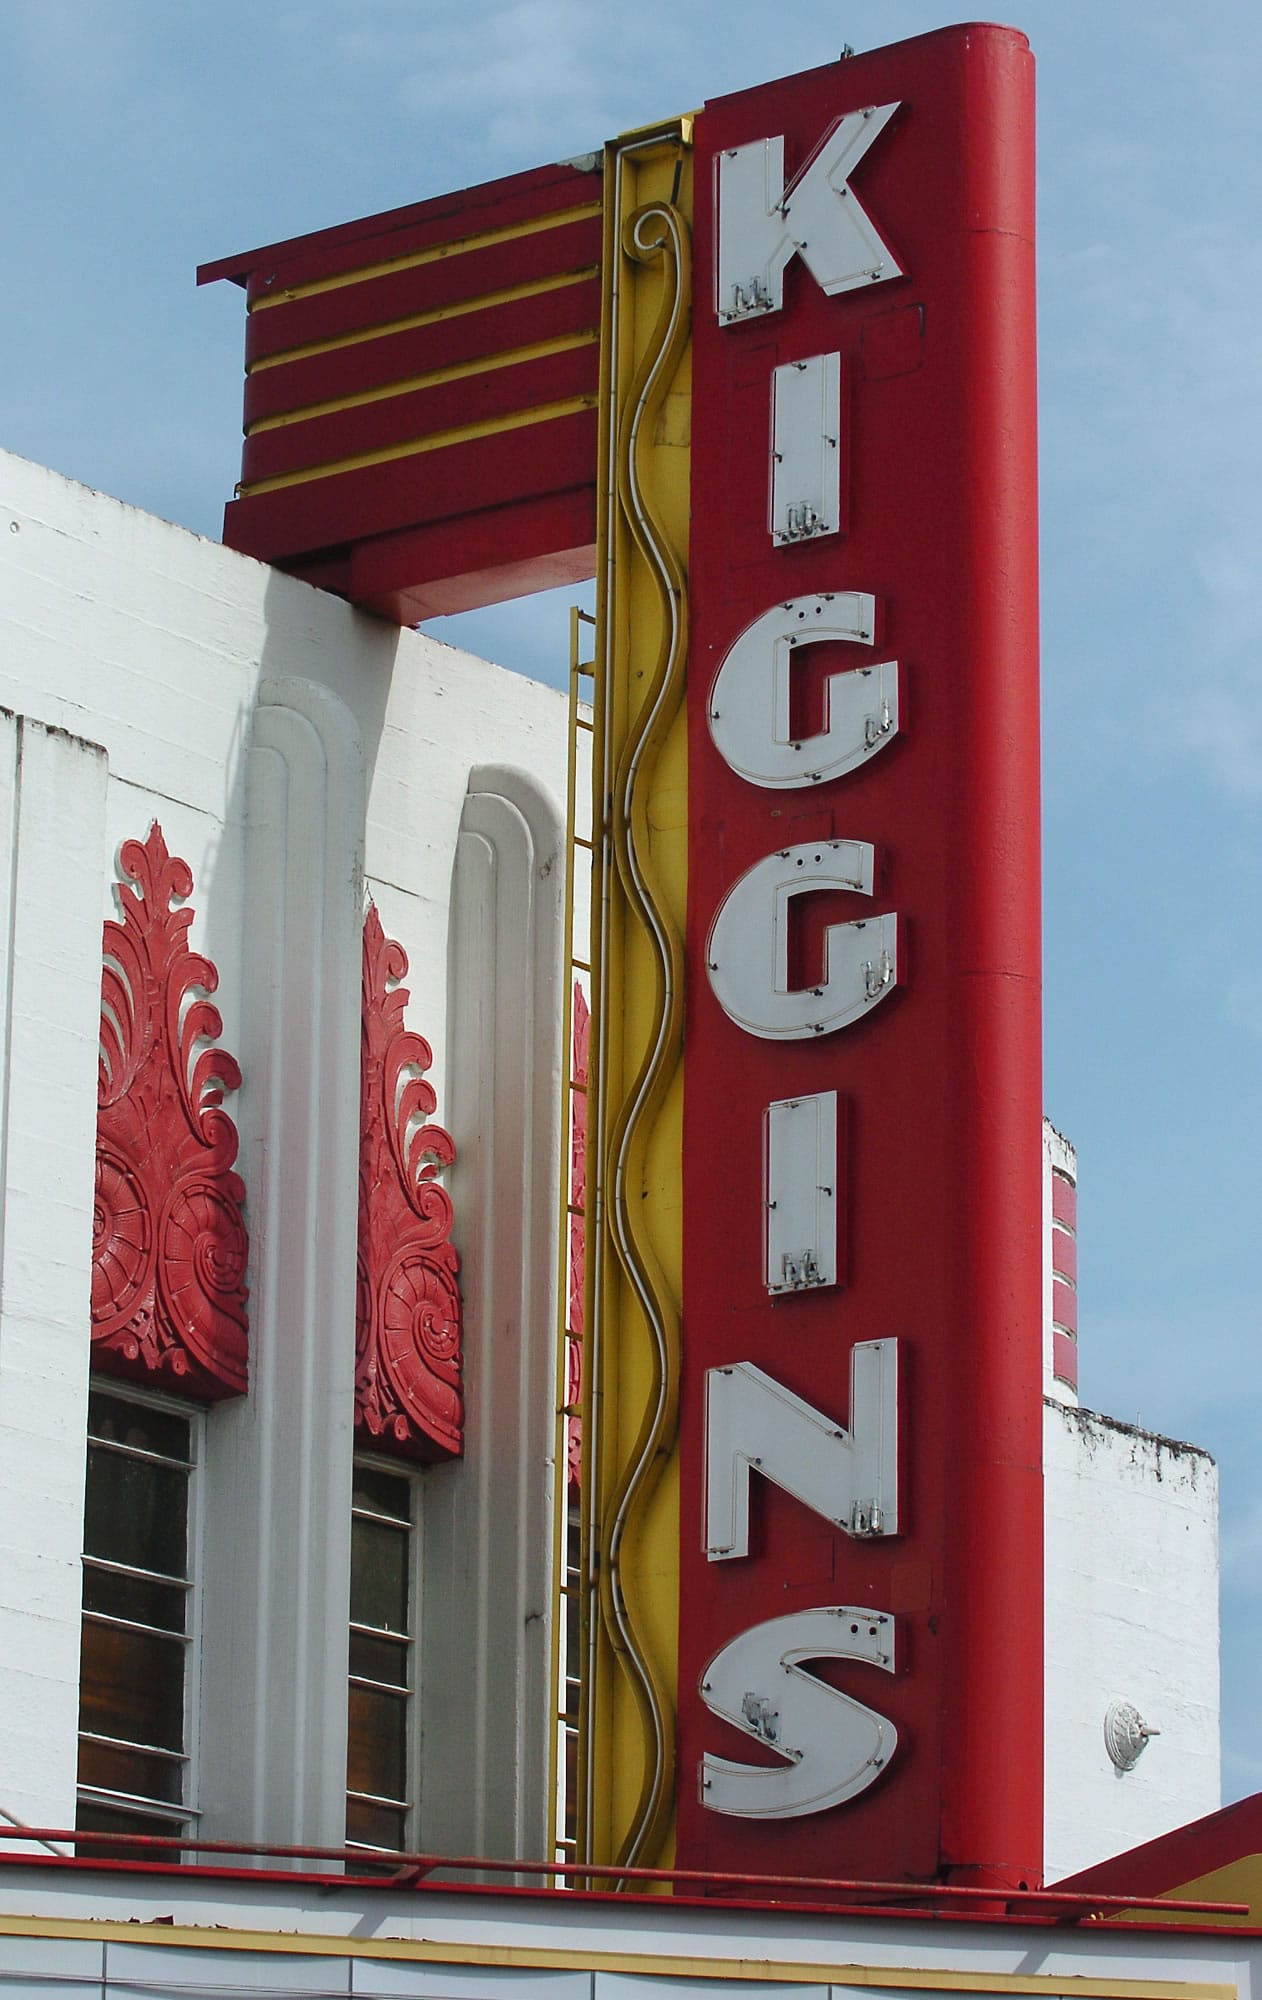 The Kiggins Theatre was designed by Day Walter Hilborn, who also was the architect for the Clark County Courthouse.